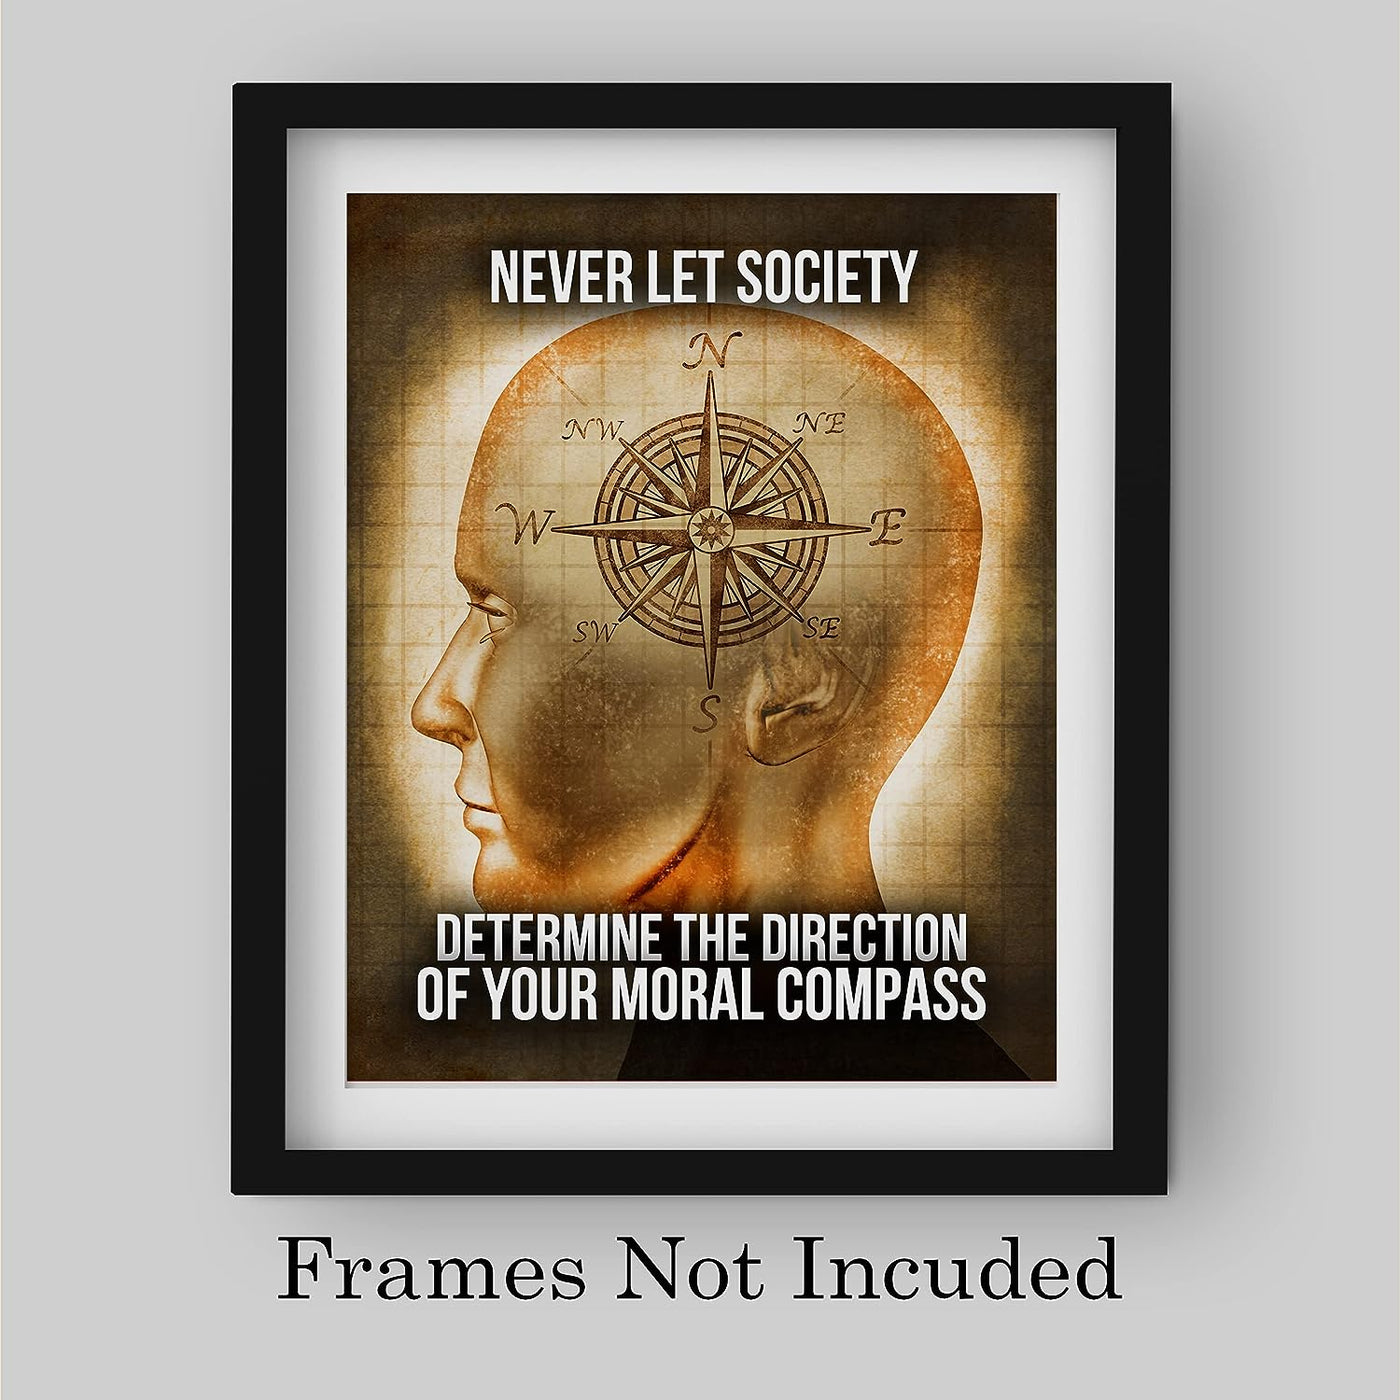 Never Let Society Determine Direction of Your Moral Compass-Political Wall Decor -8 x 10" Motivational Art Print -Ready to Frame. Inspirational Home-Office-Garage-Bar-Cave Decor. Great Reminder!